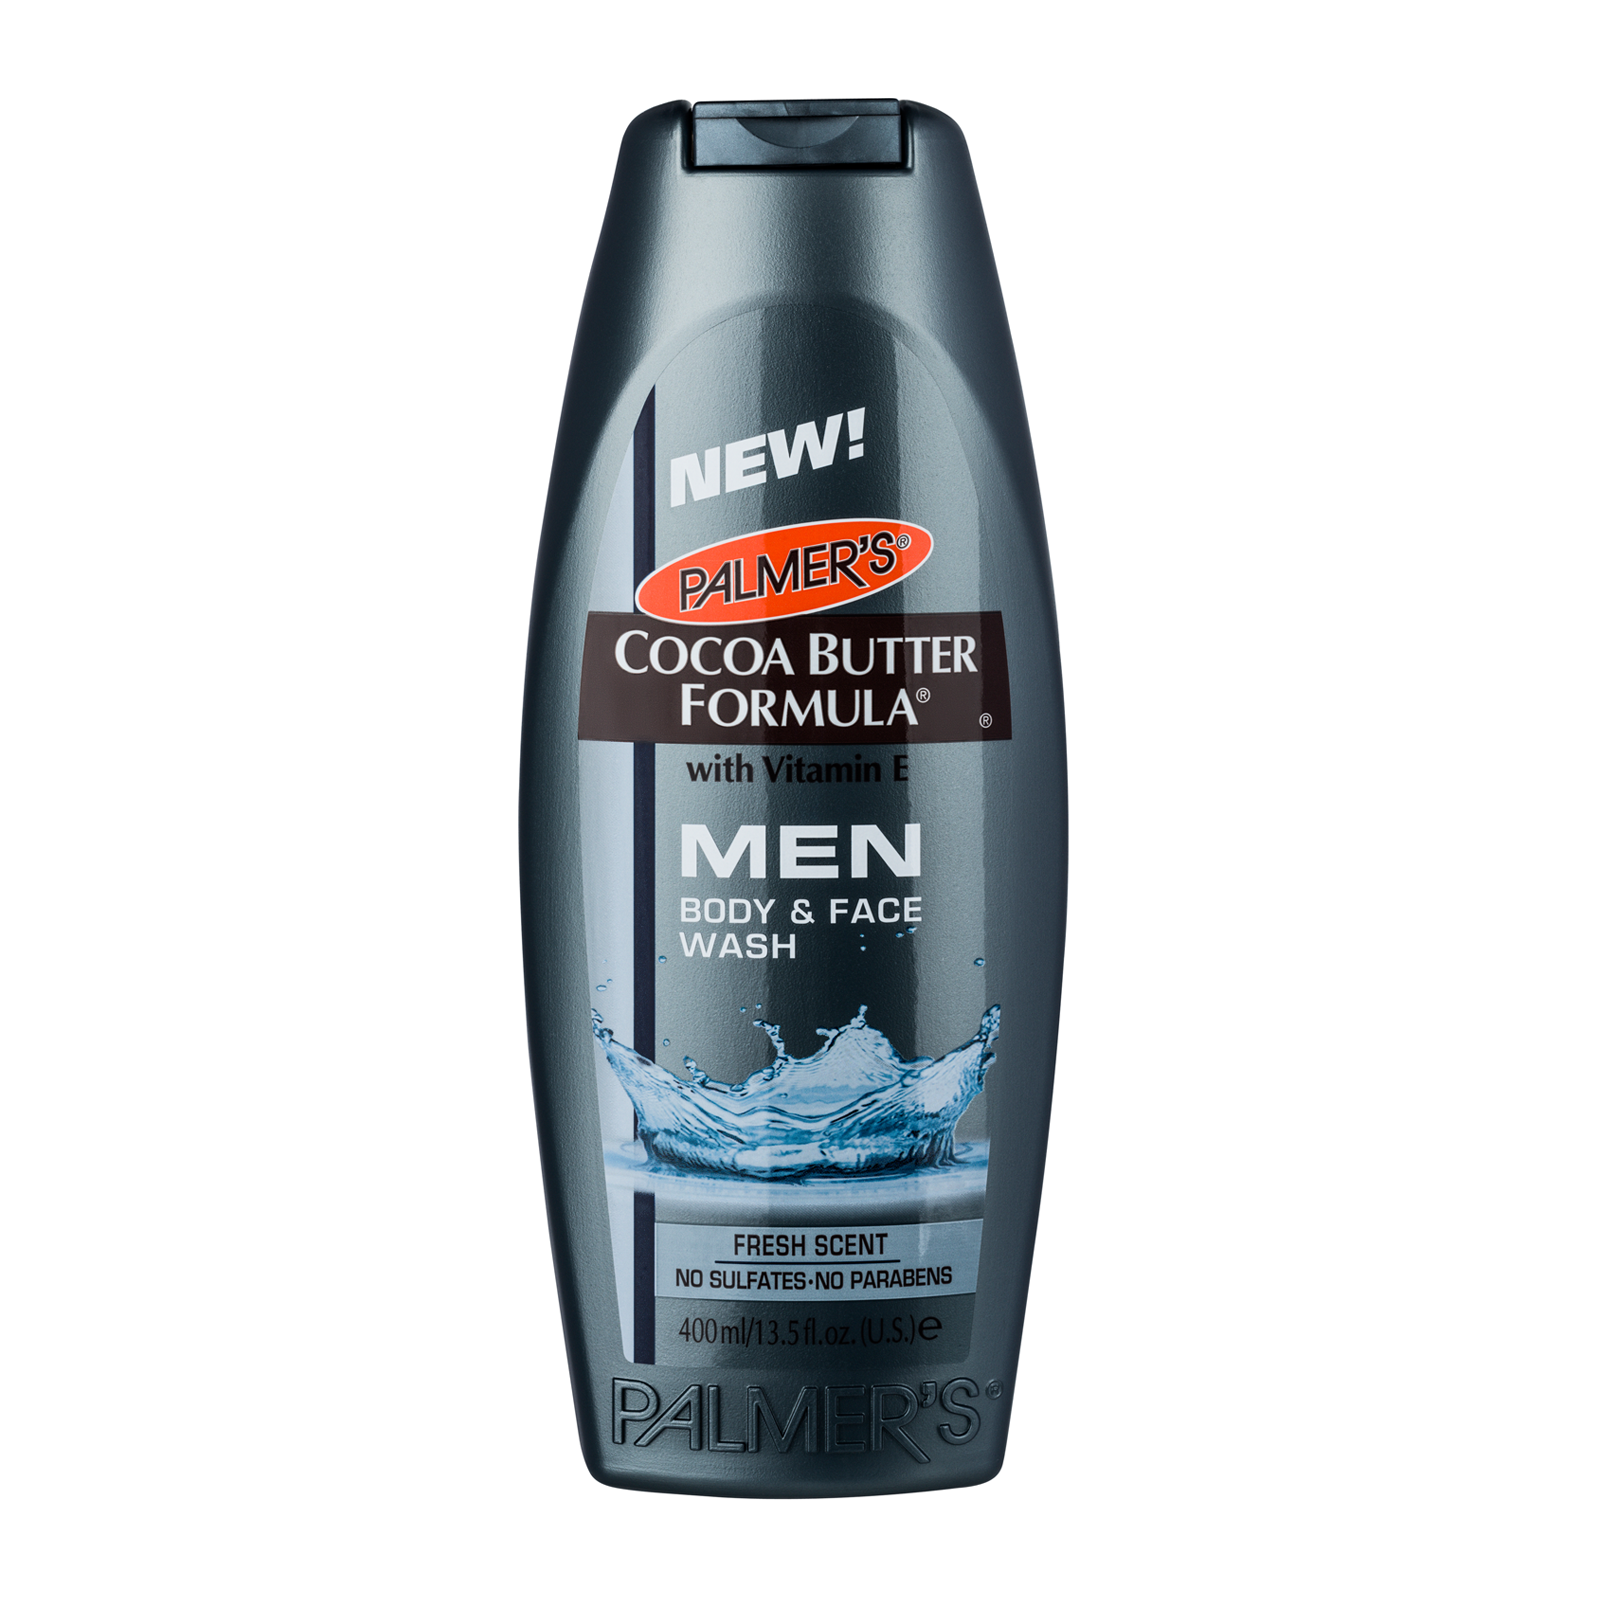 http://cdn1.feelunique.com/img/products/45422/Palmer__039_s_Cocoa_Butter_Formula_MEN_Body__amp__Face_Wash_400ml_1384357164.png